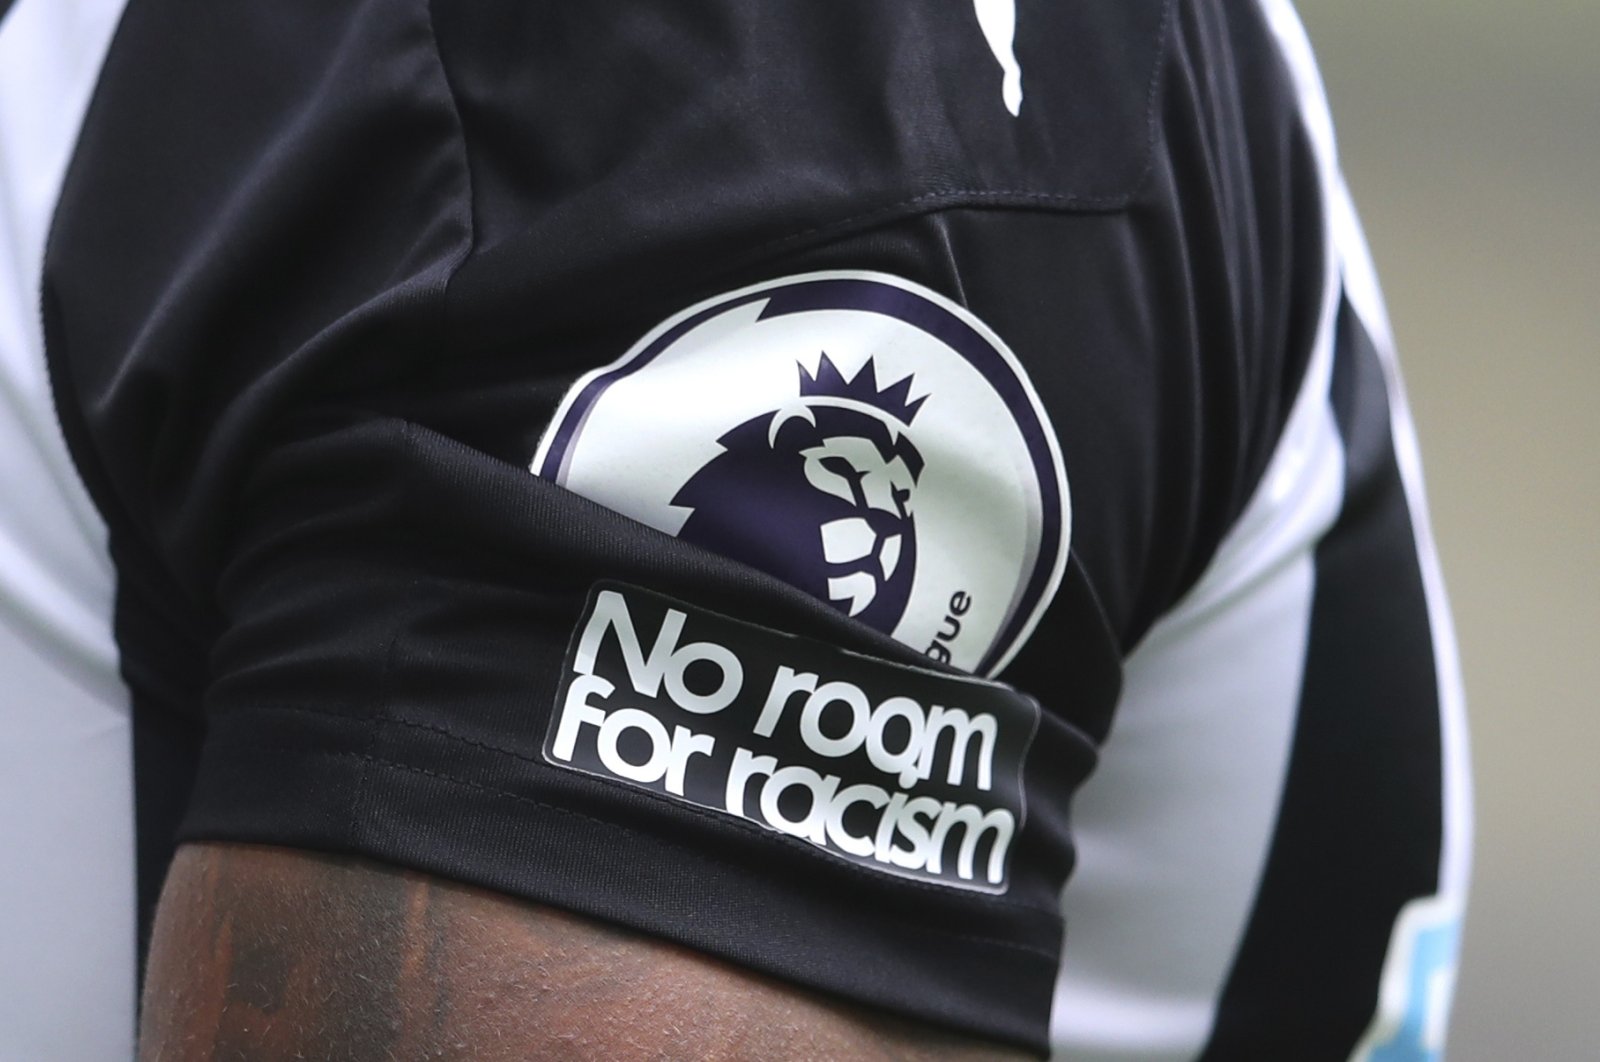 The "No room for racism" badge is seen on the shirt of a Newcastle United players, Newcastle, England, Sept. 20, 2020.